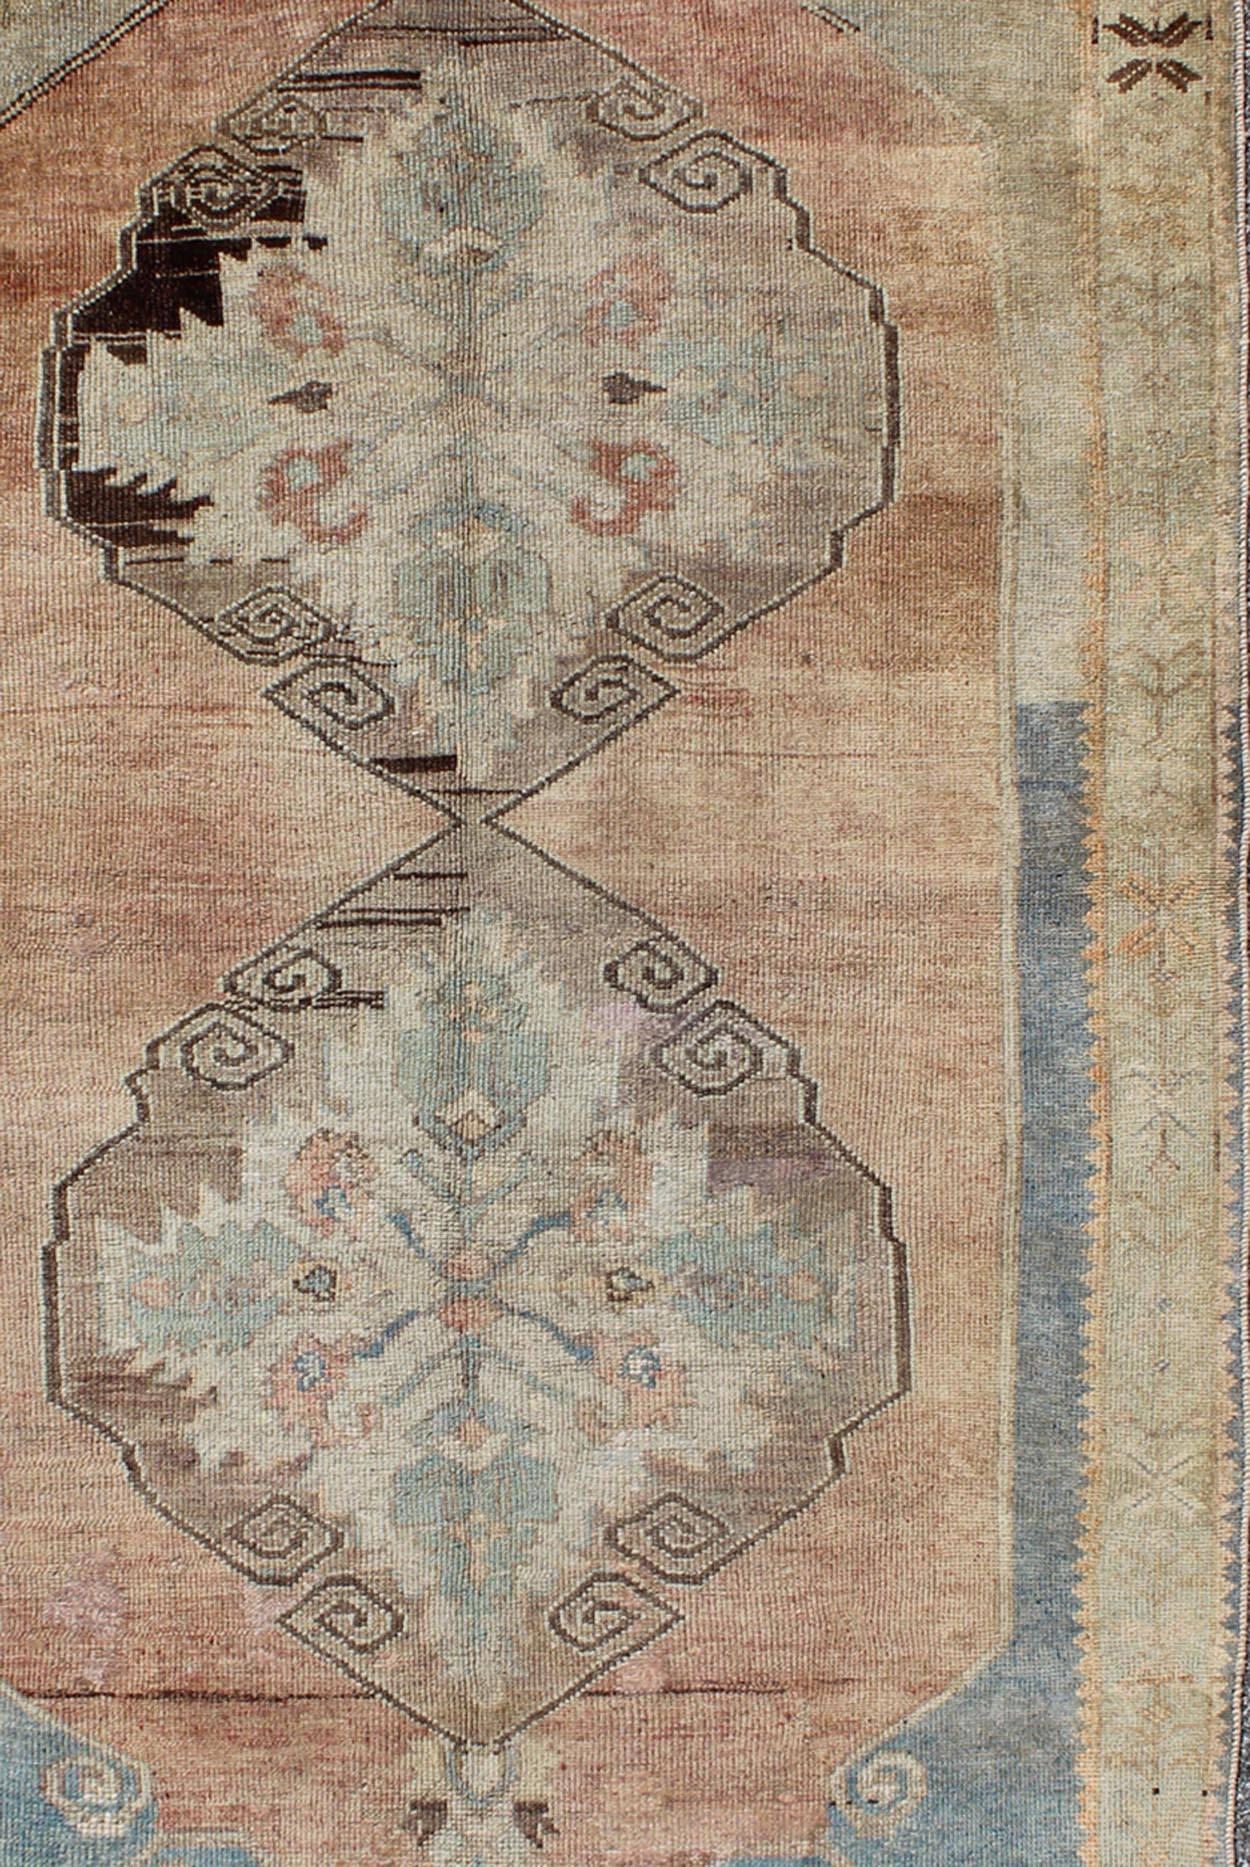 Hand-Knotted Dual Medallion Antique Turkish Oushak Rug in Reddish Brown, Blue and Green